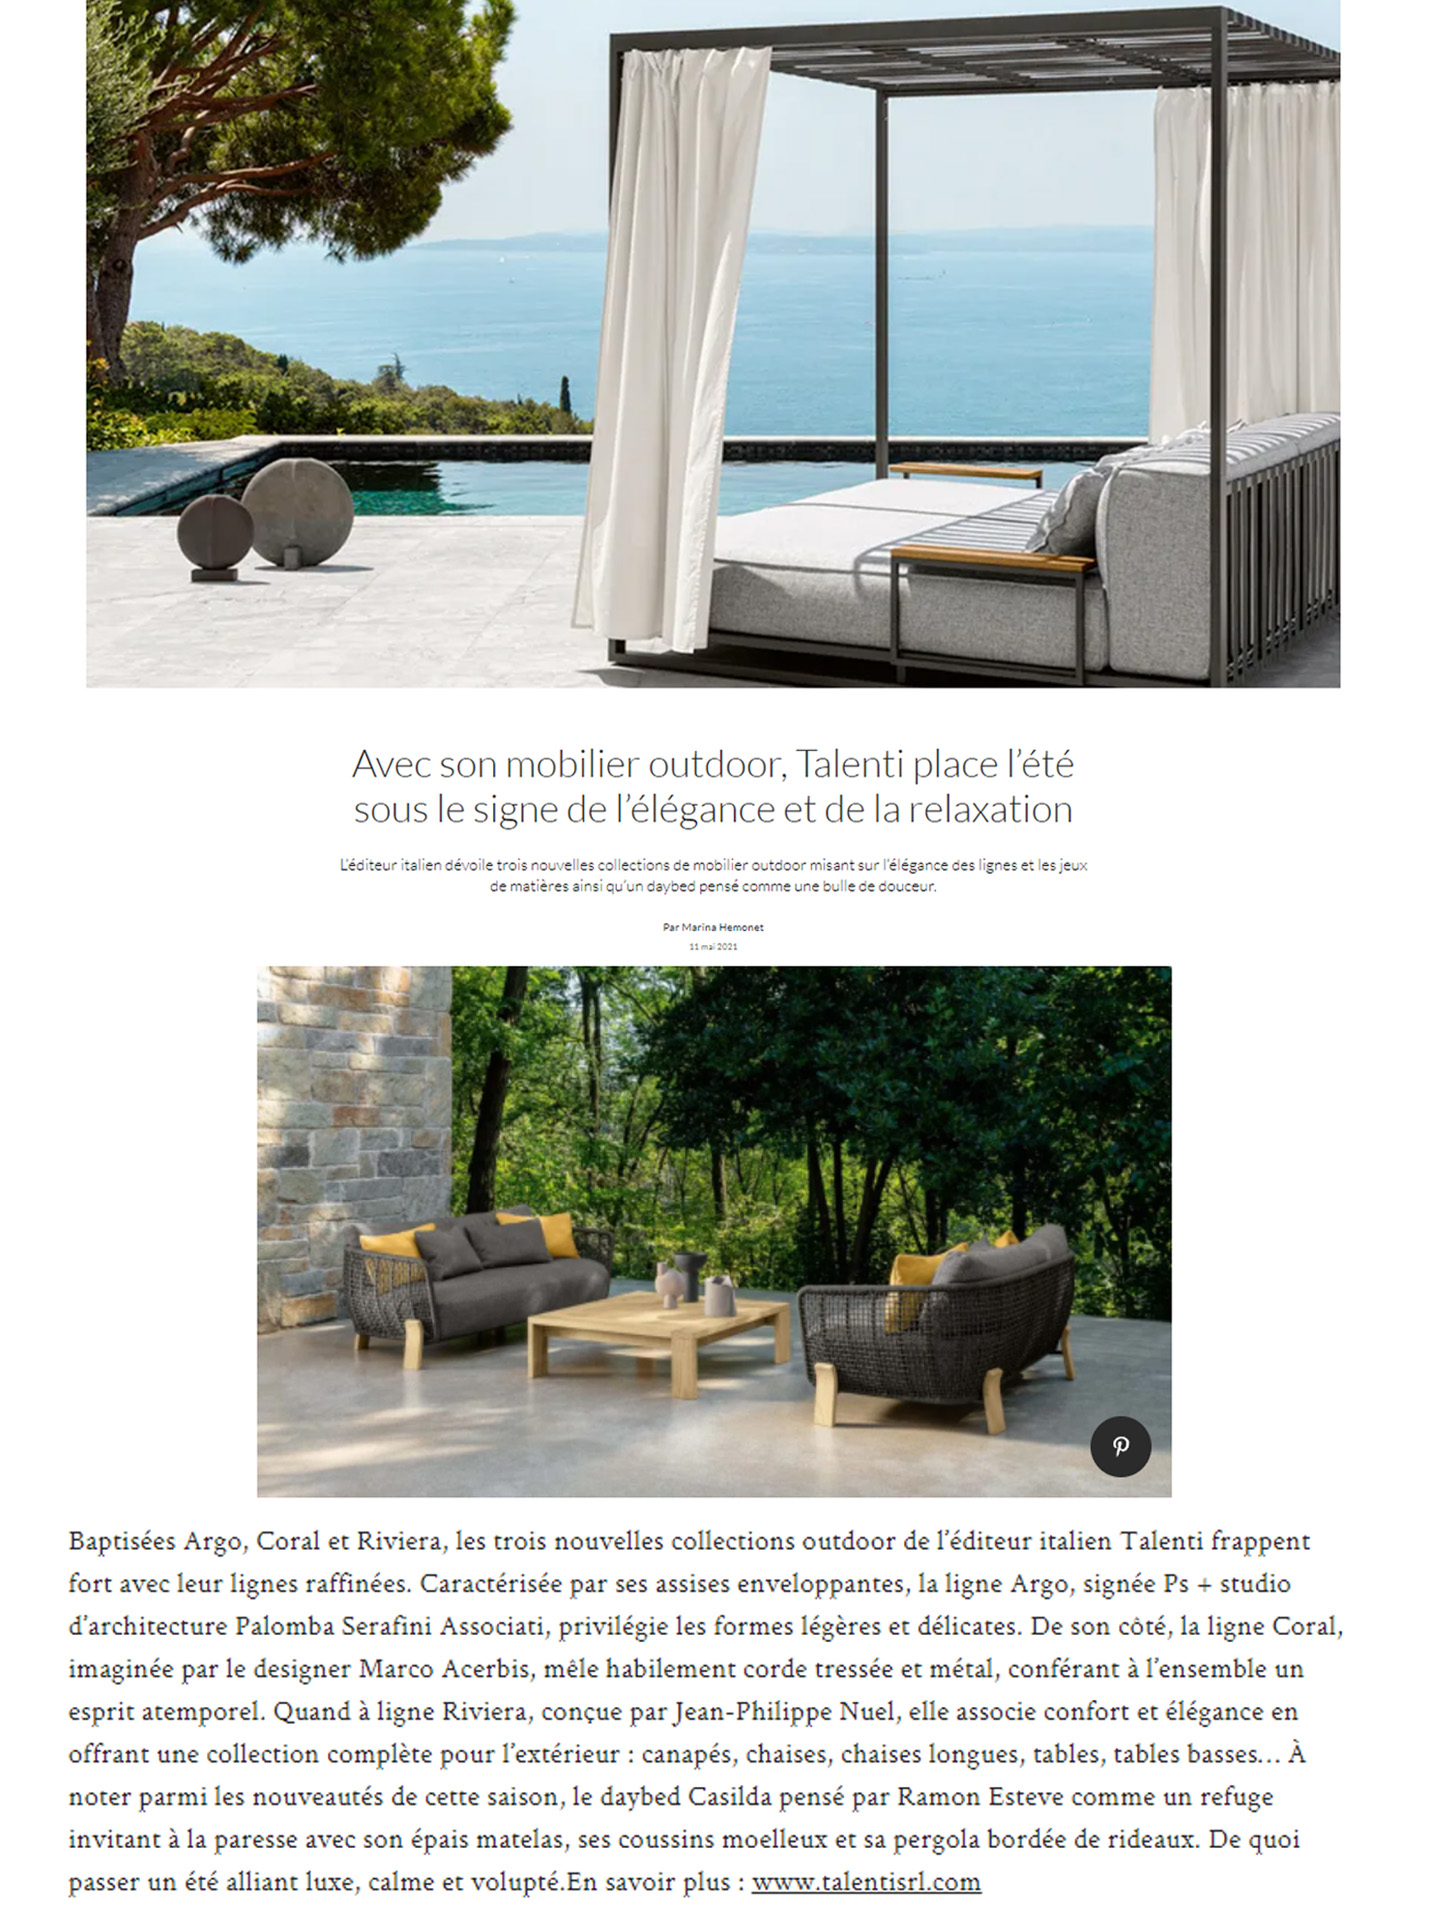 Article on the Riviera range of luxury garden furniture for talenti outdoor living created by the studio jean-philippe nuel in the magazine ad, design d'objets, french designer